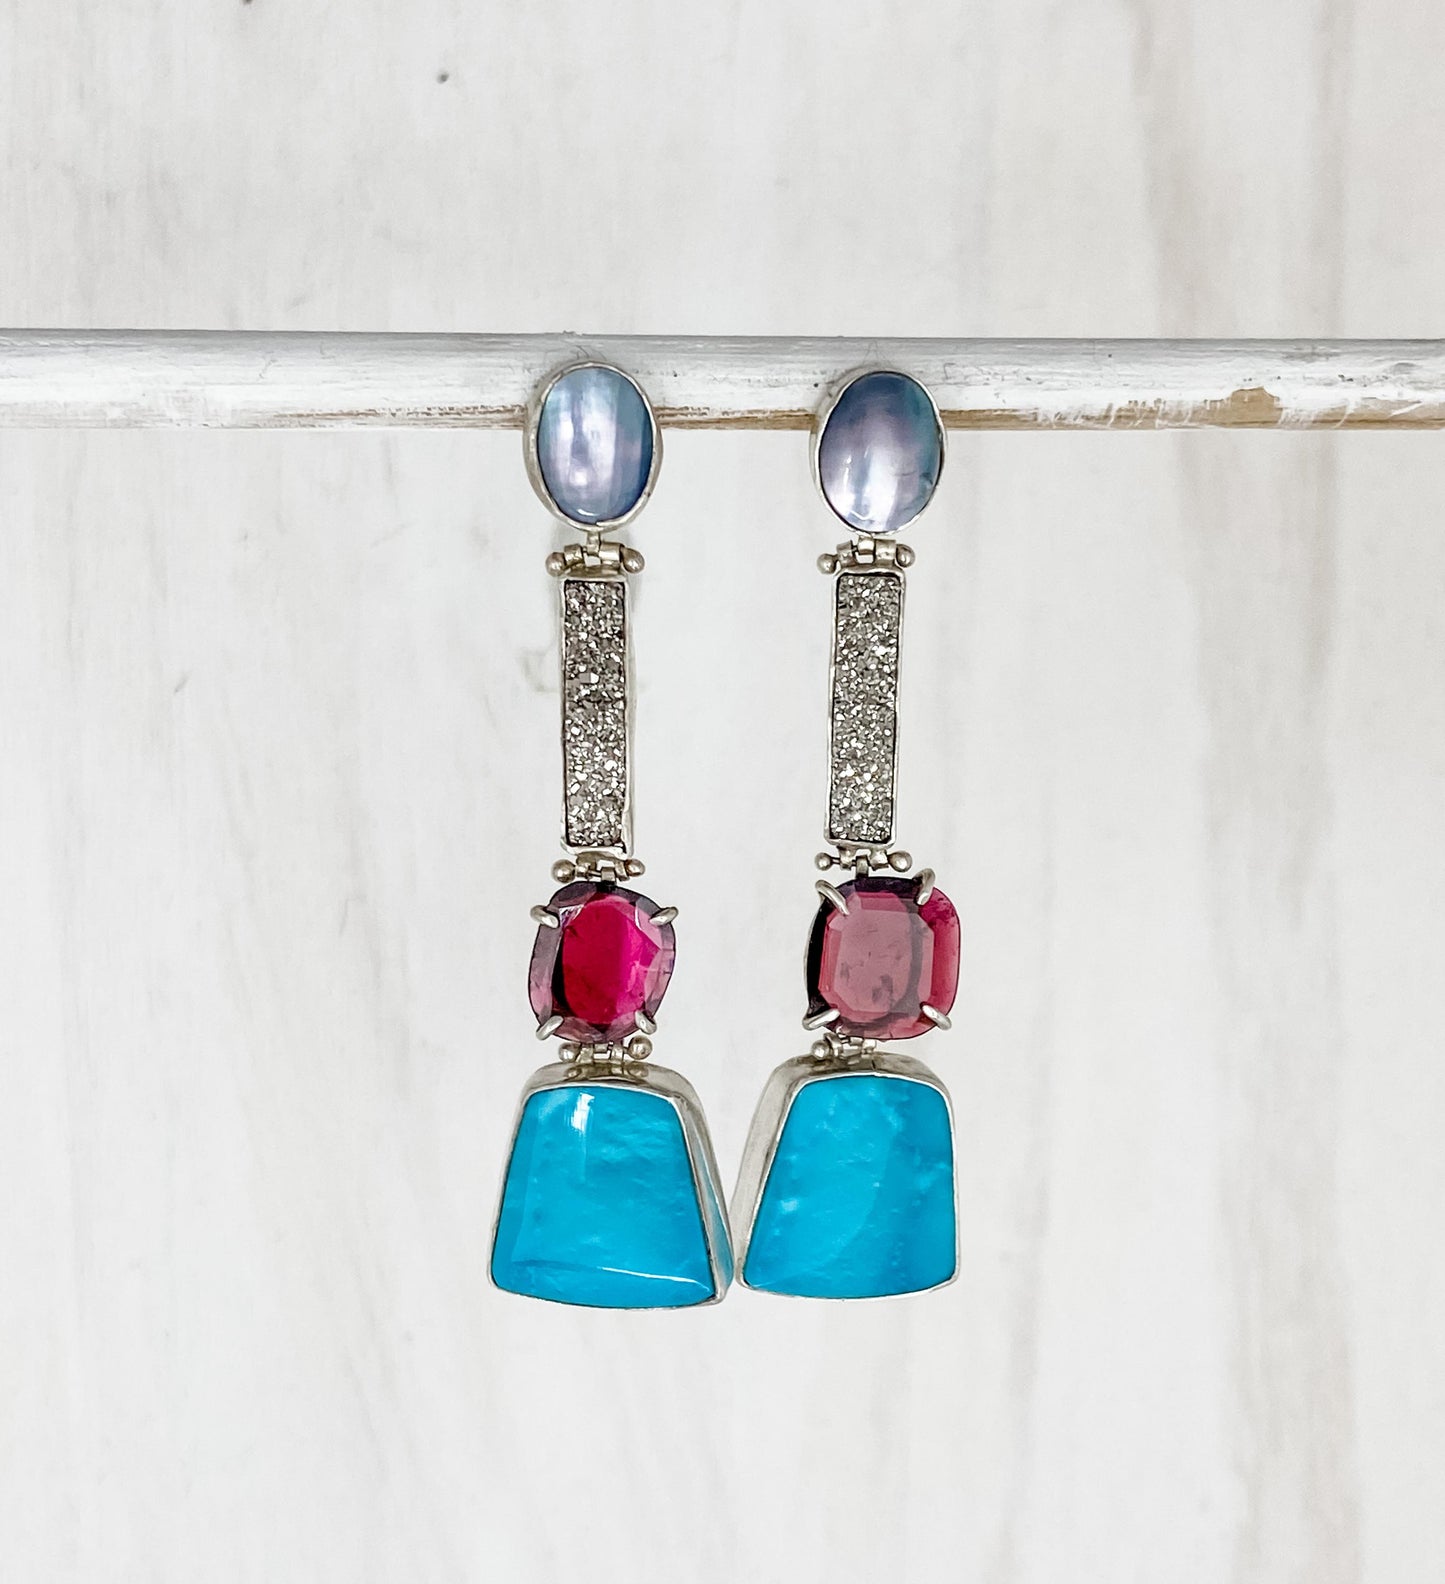 Hinged Earrings: Mother of Pearl, Druzy, Tourmaline, Turquoise